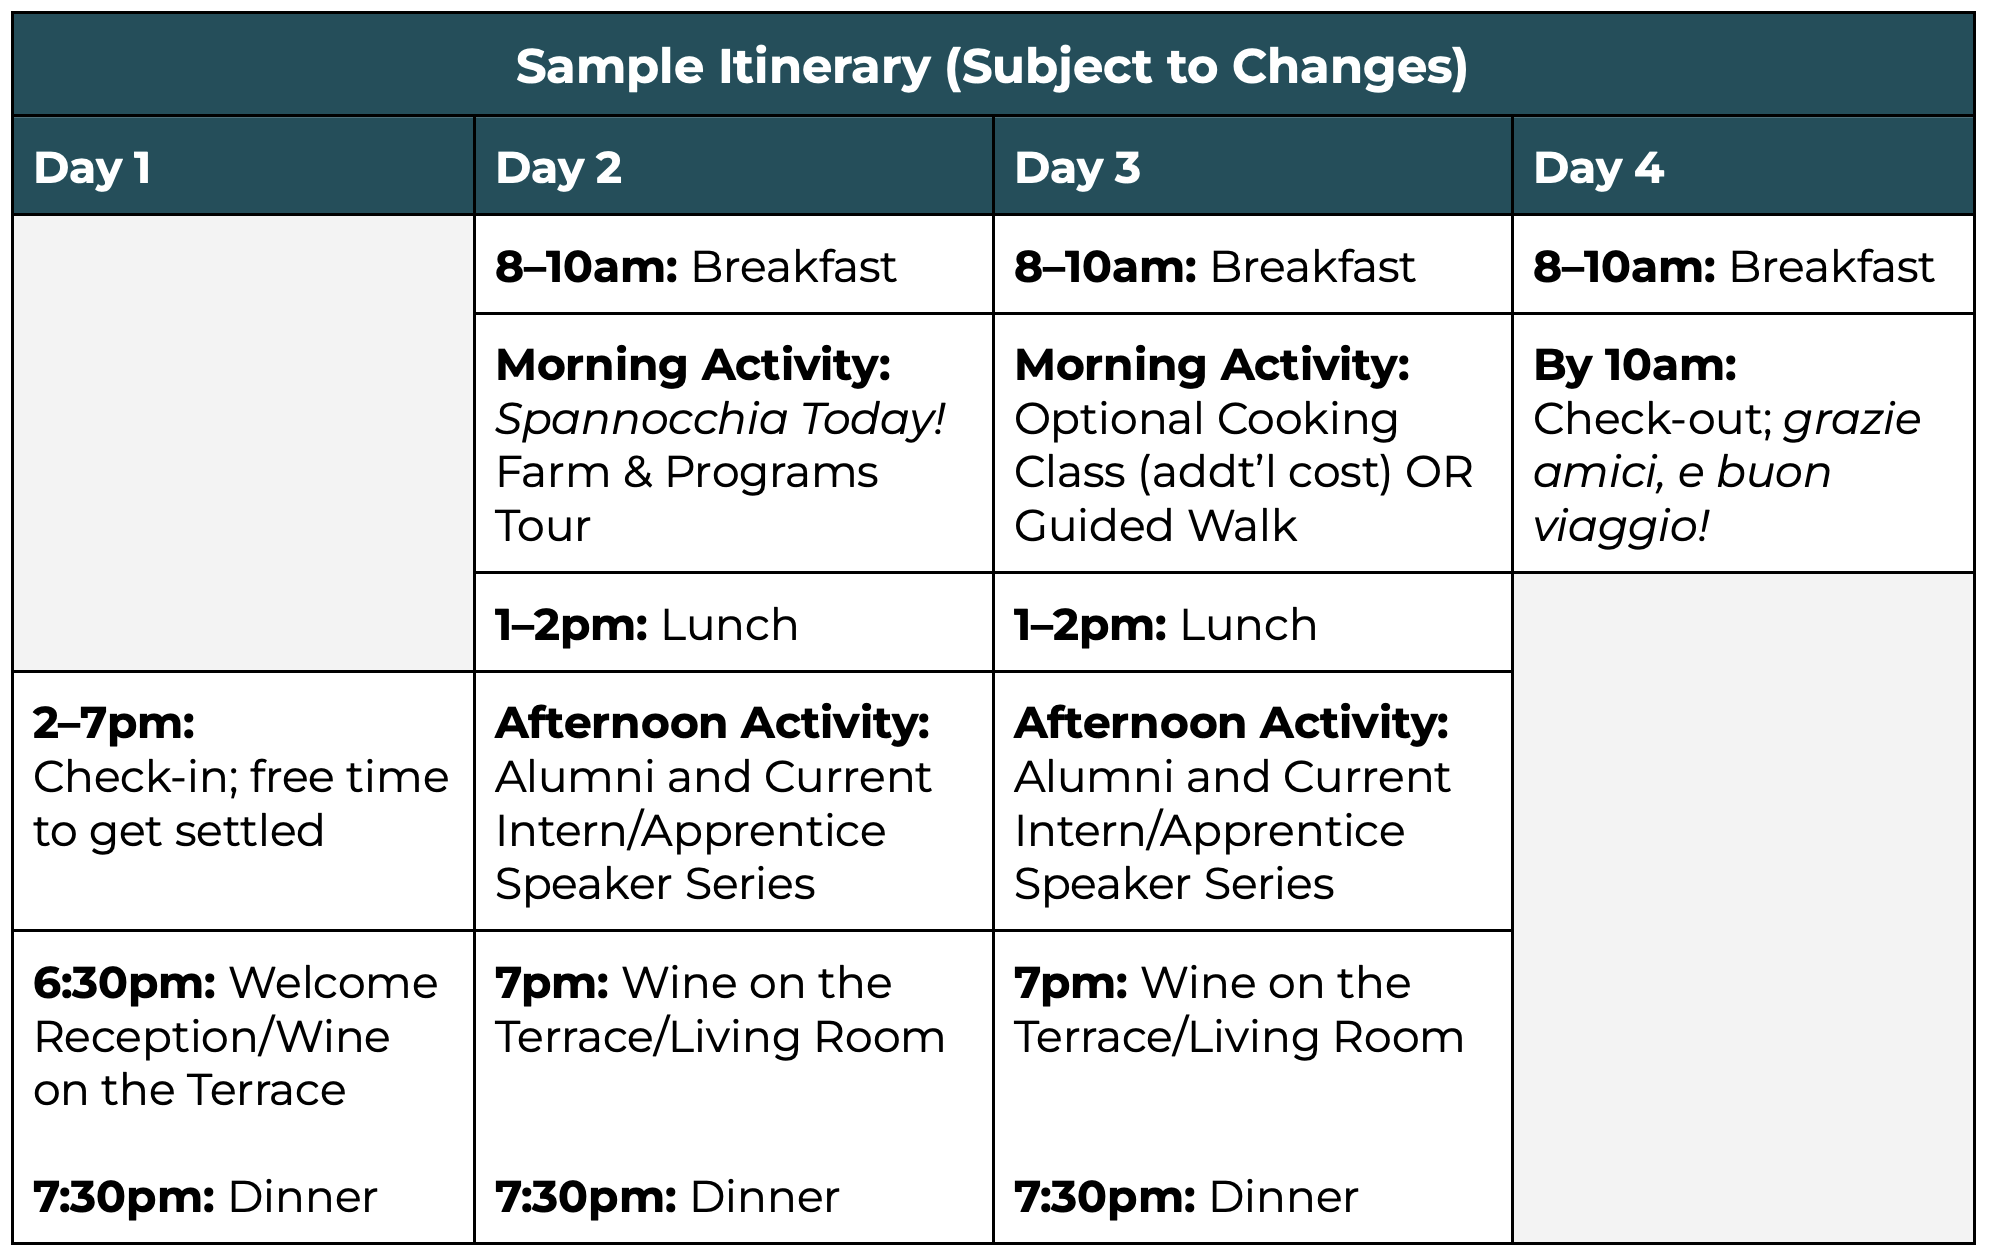 Sample Itinerary for alumni reunions. Itinerary can be found in text form in the document linked here.